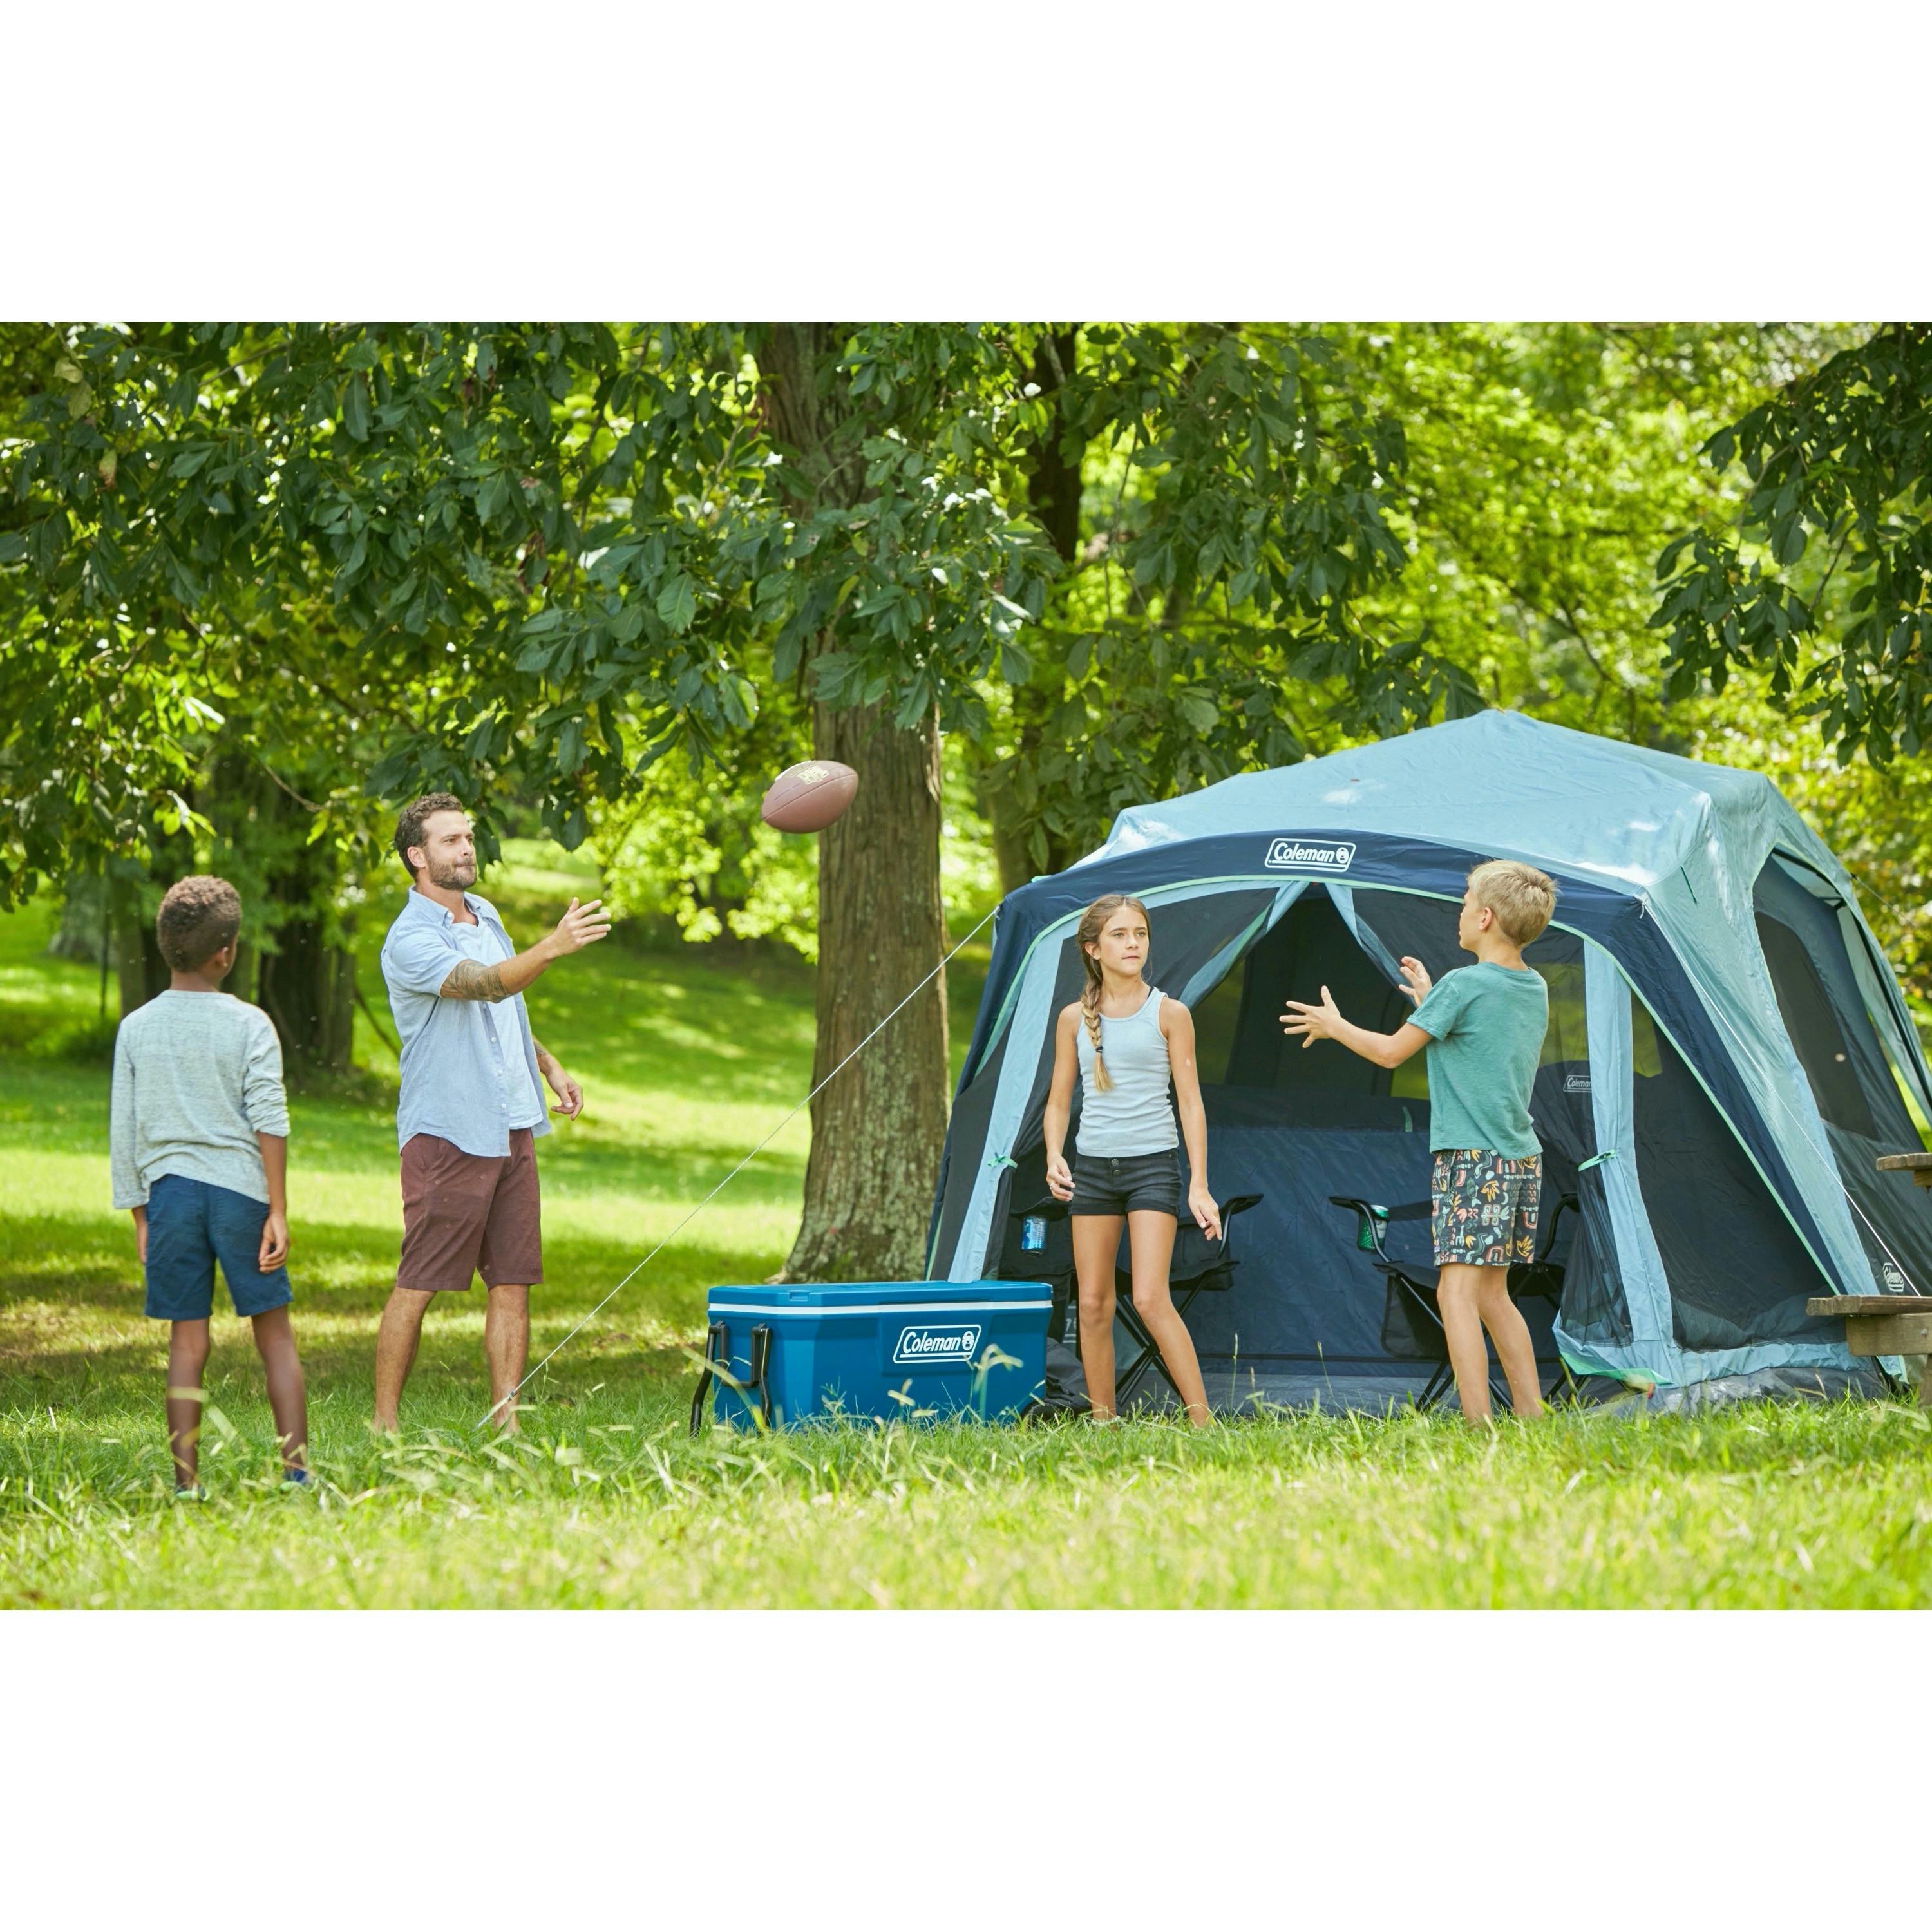 Coleman Skylodge Instant Camping Tent with Screen Room